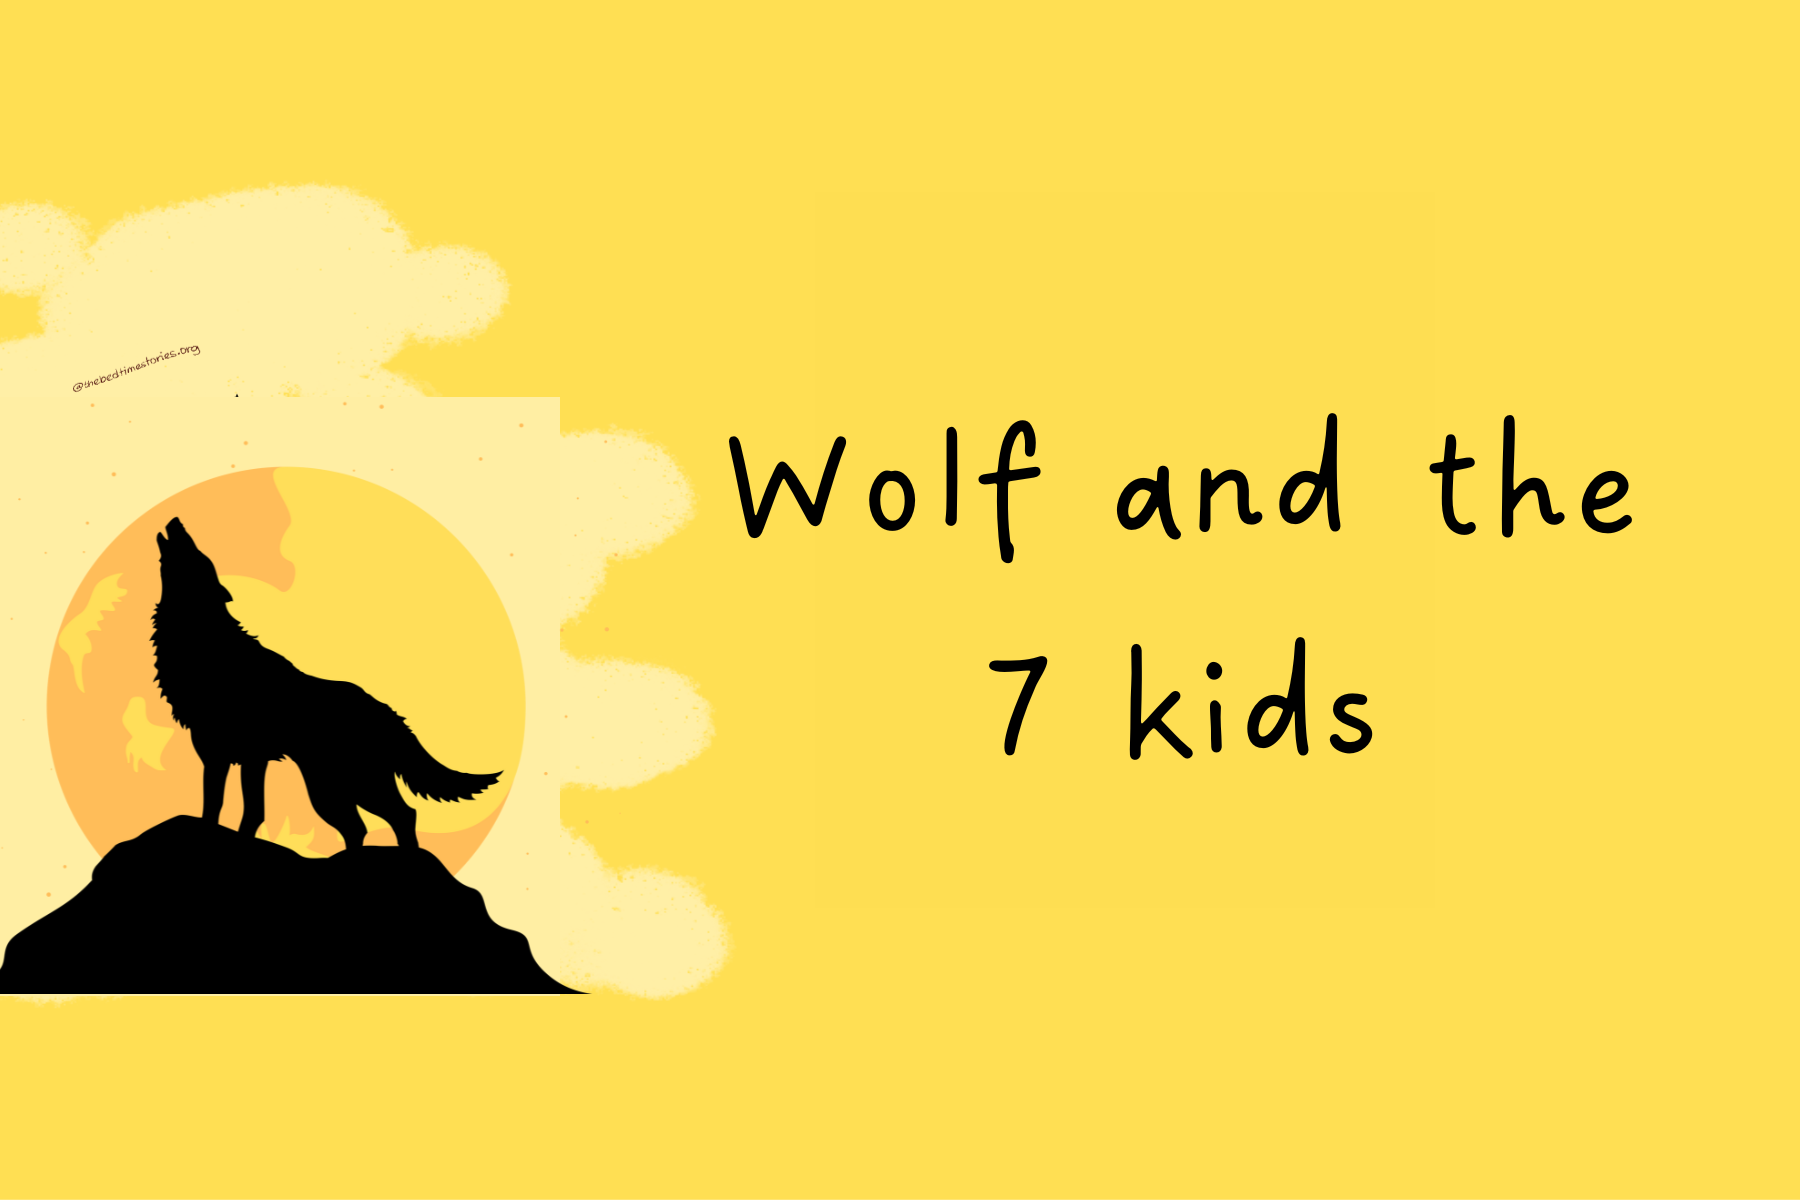 The Wolf And 7 Kids: Top 5 Best Animal Stories - Bed Time stories